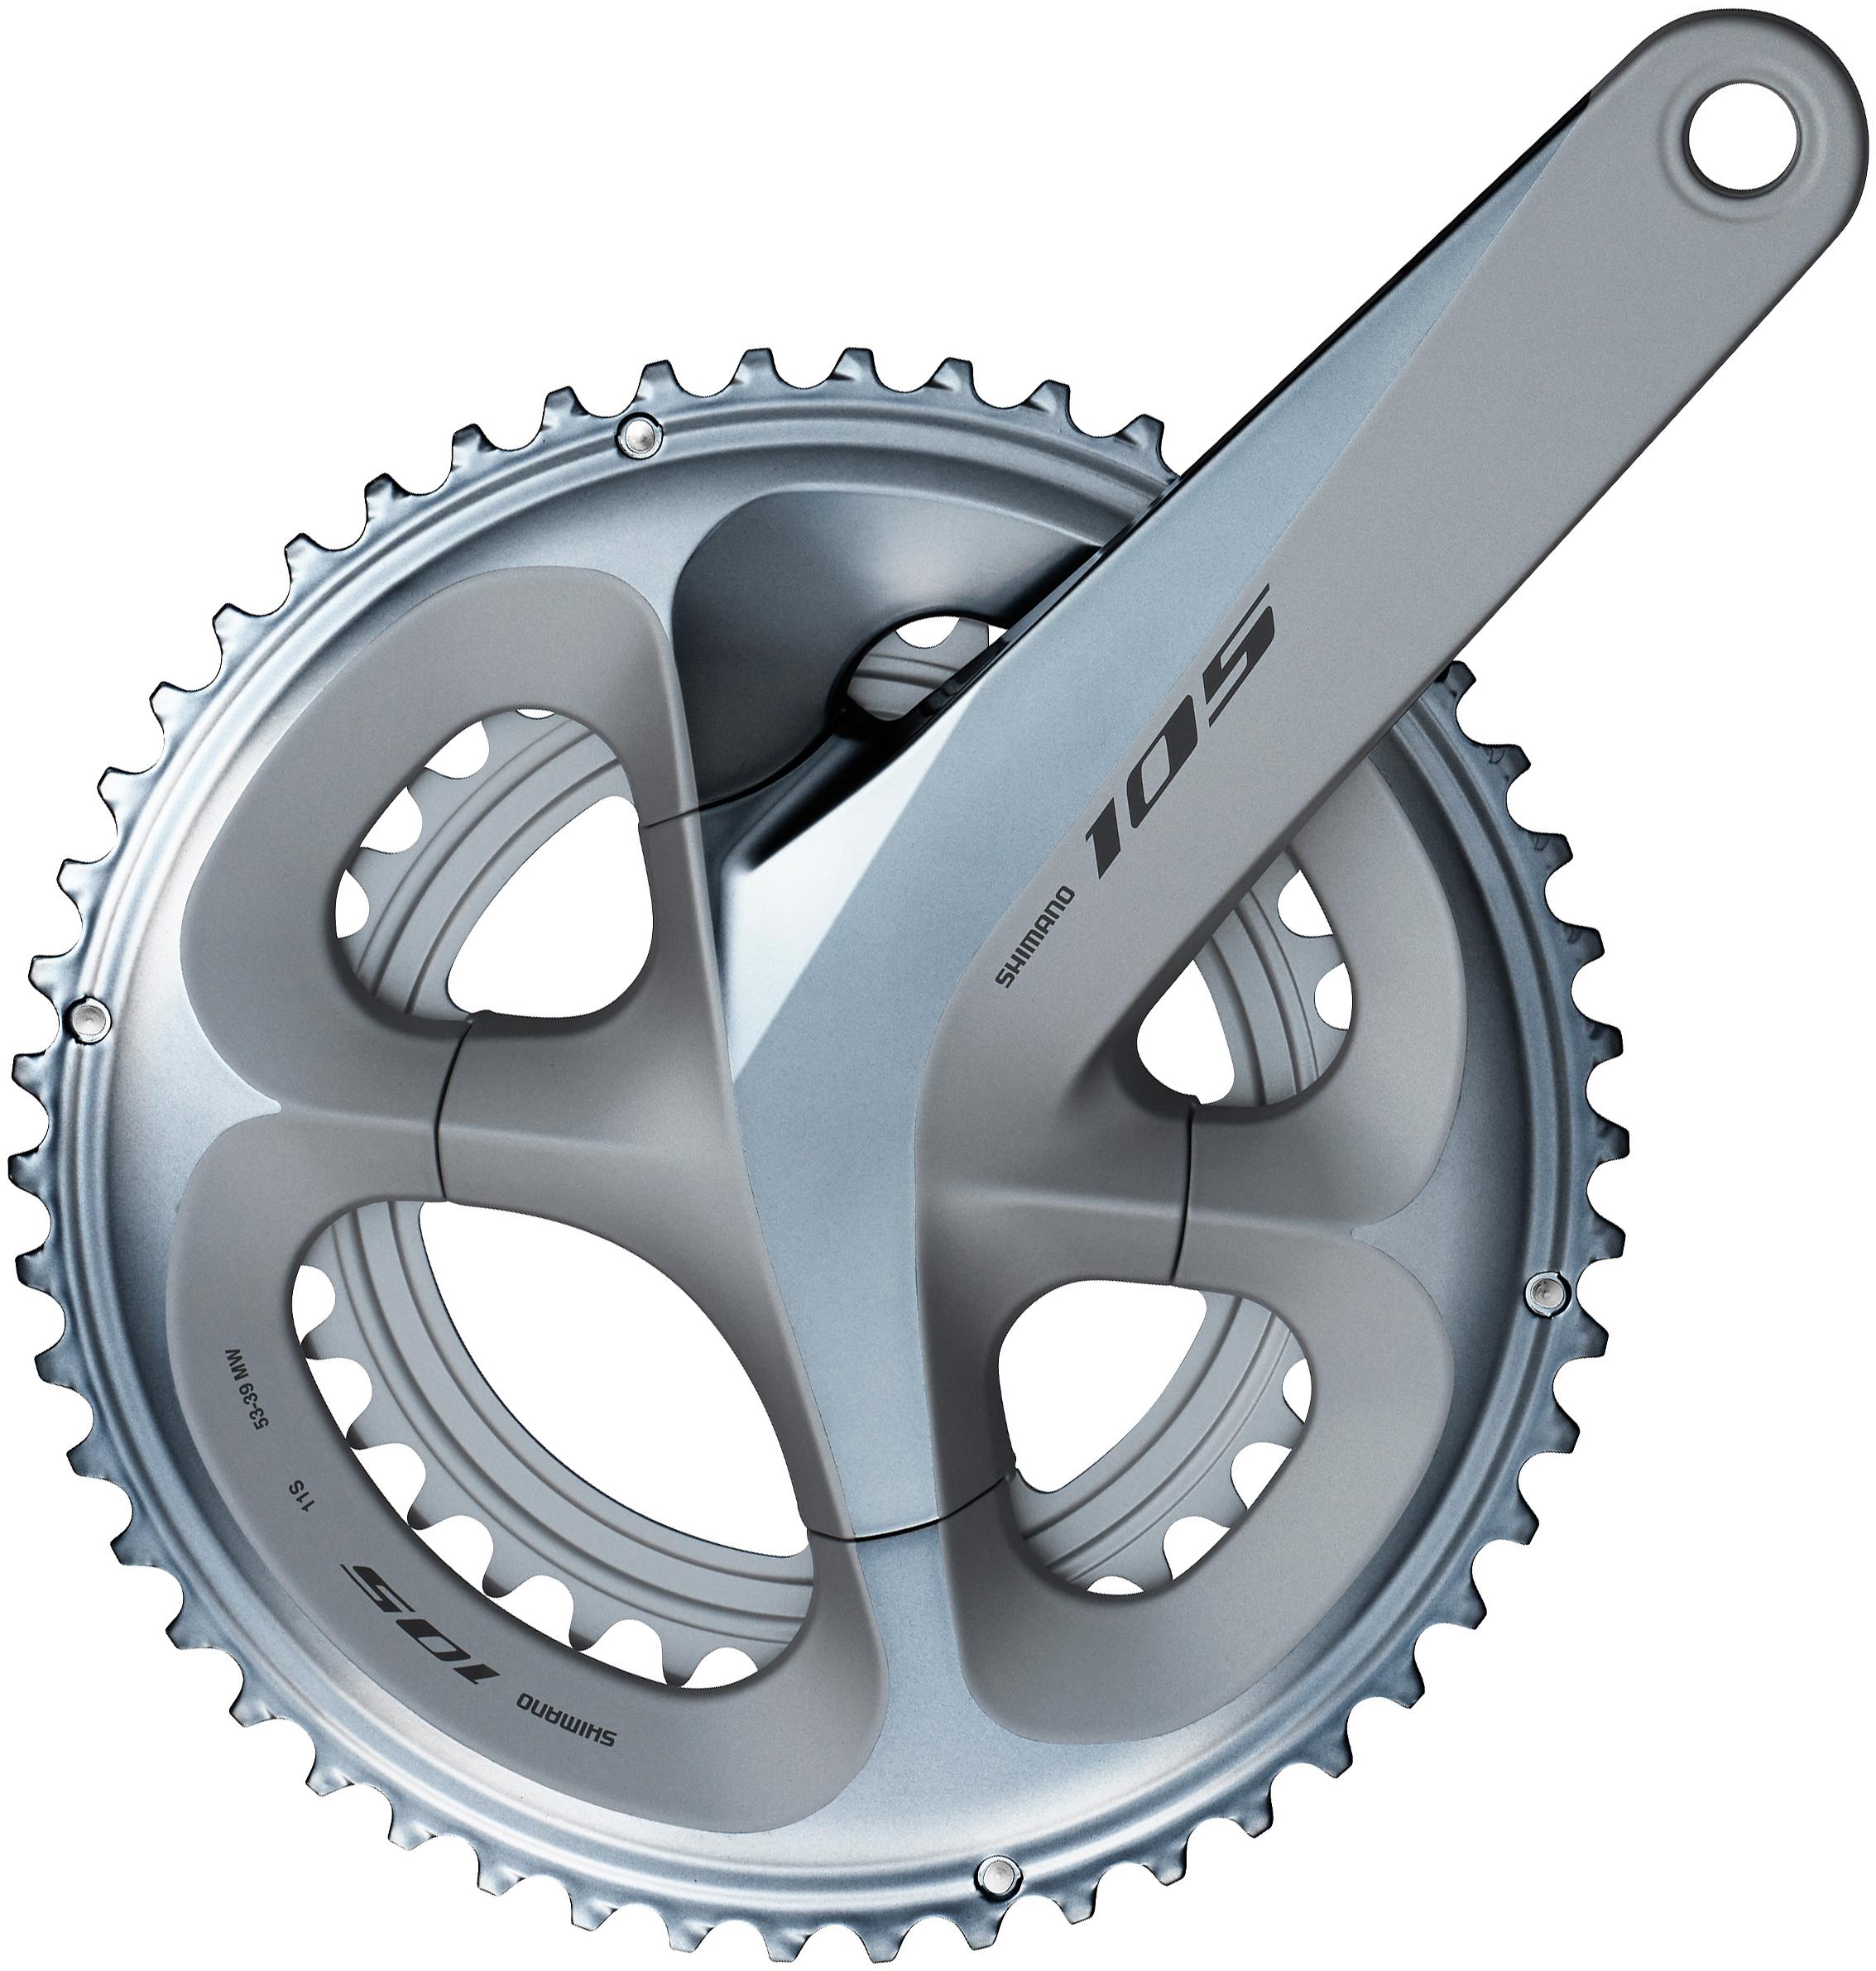 Shimano 105 R7000 11 Speed Double Chainset - Silver